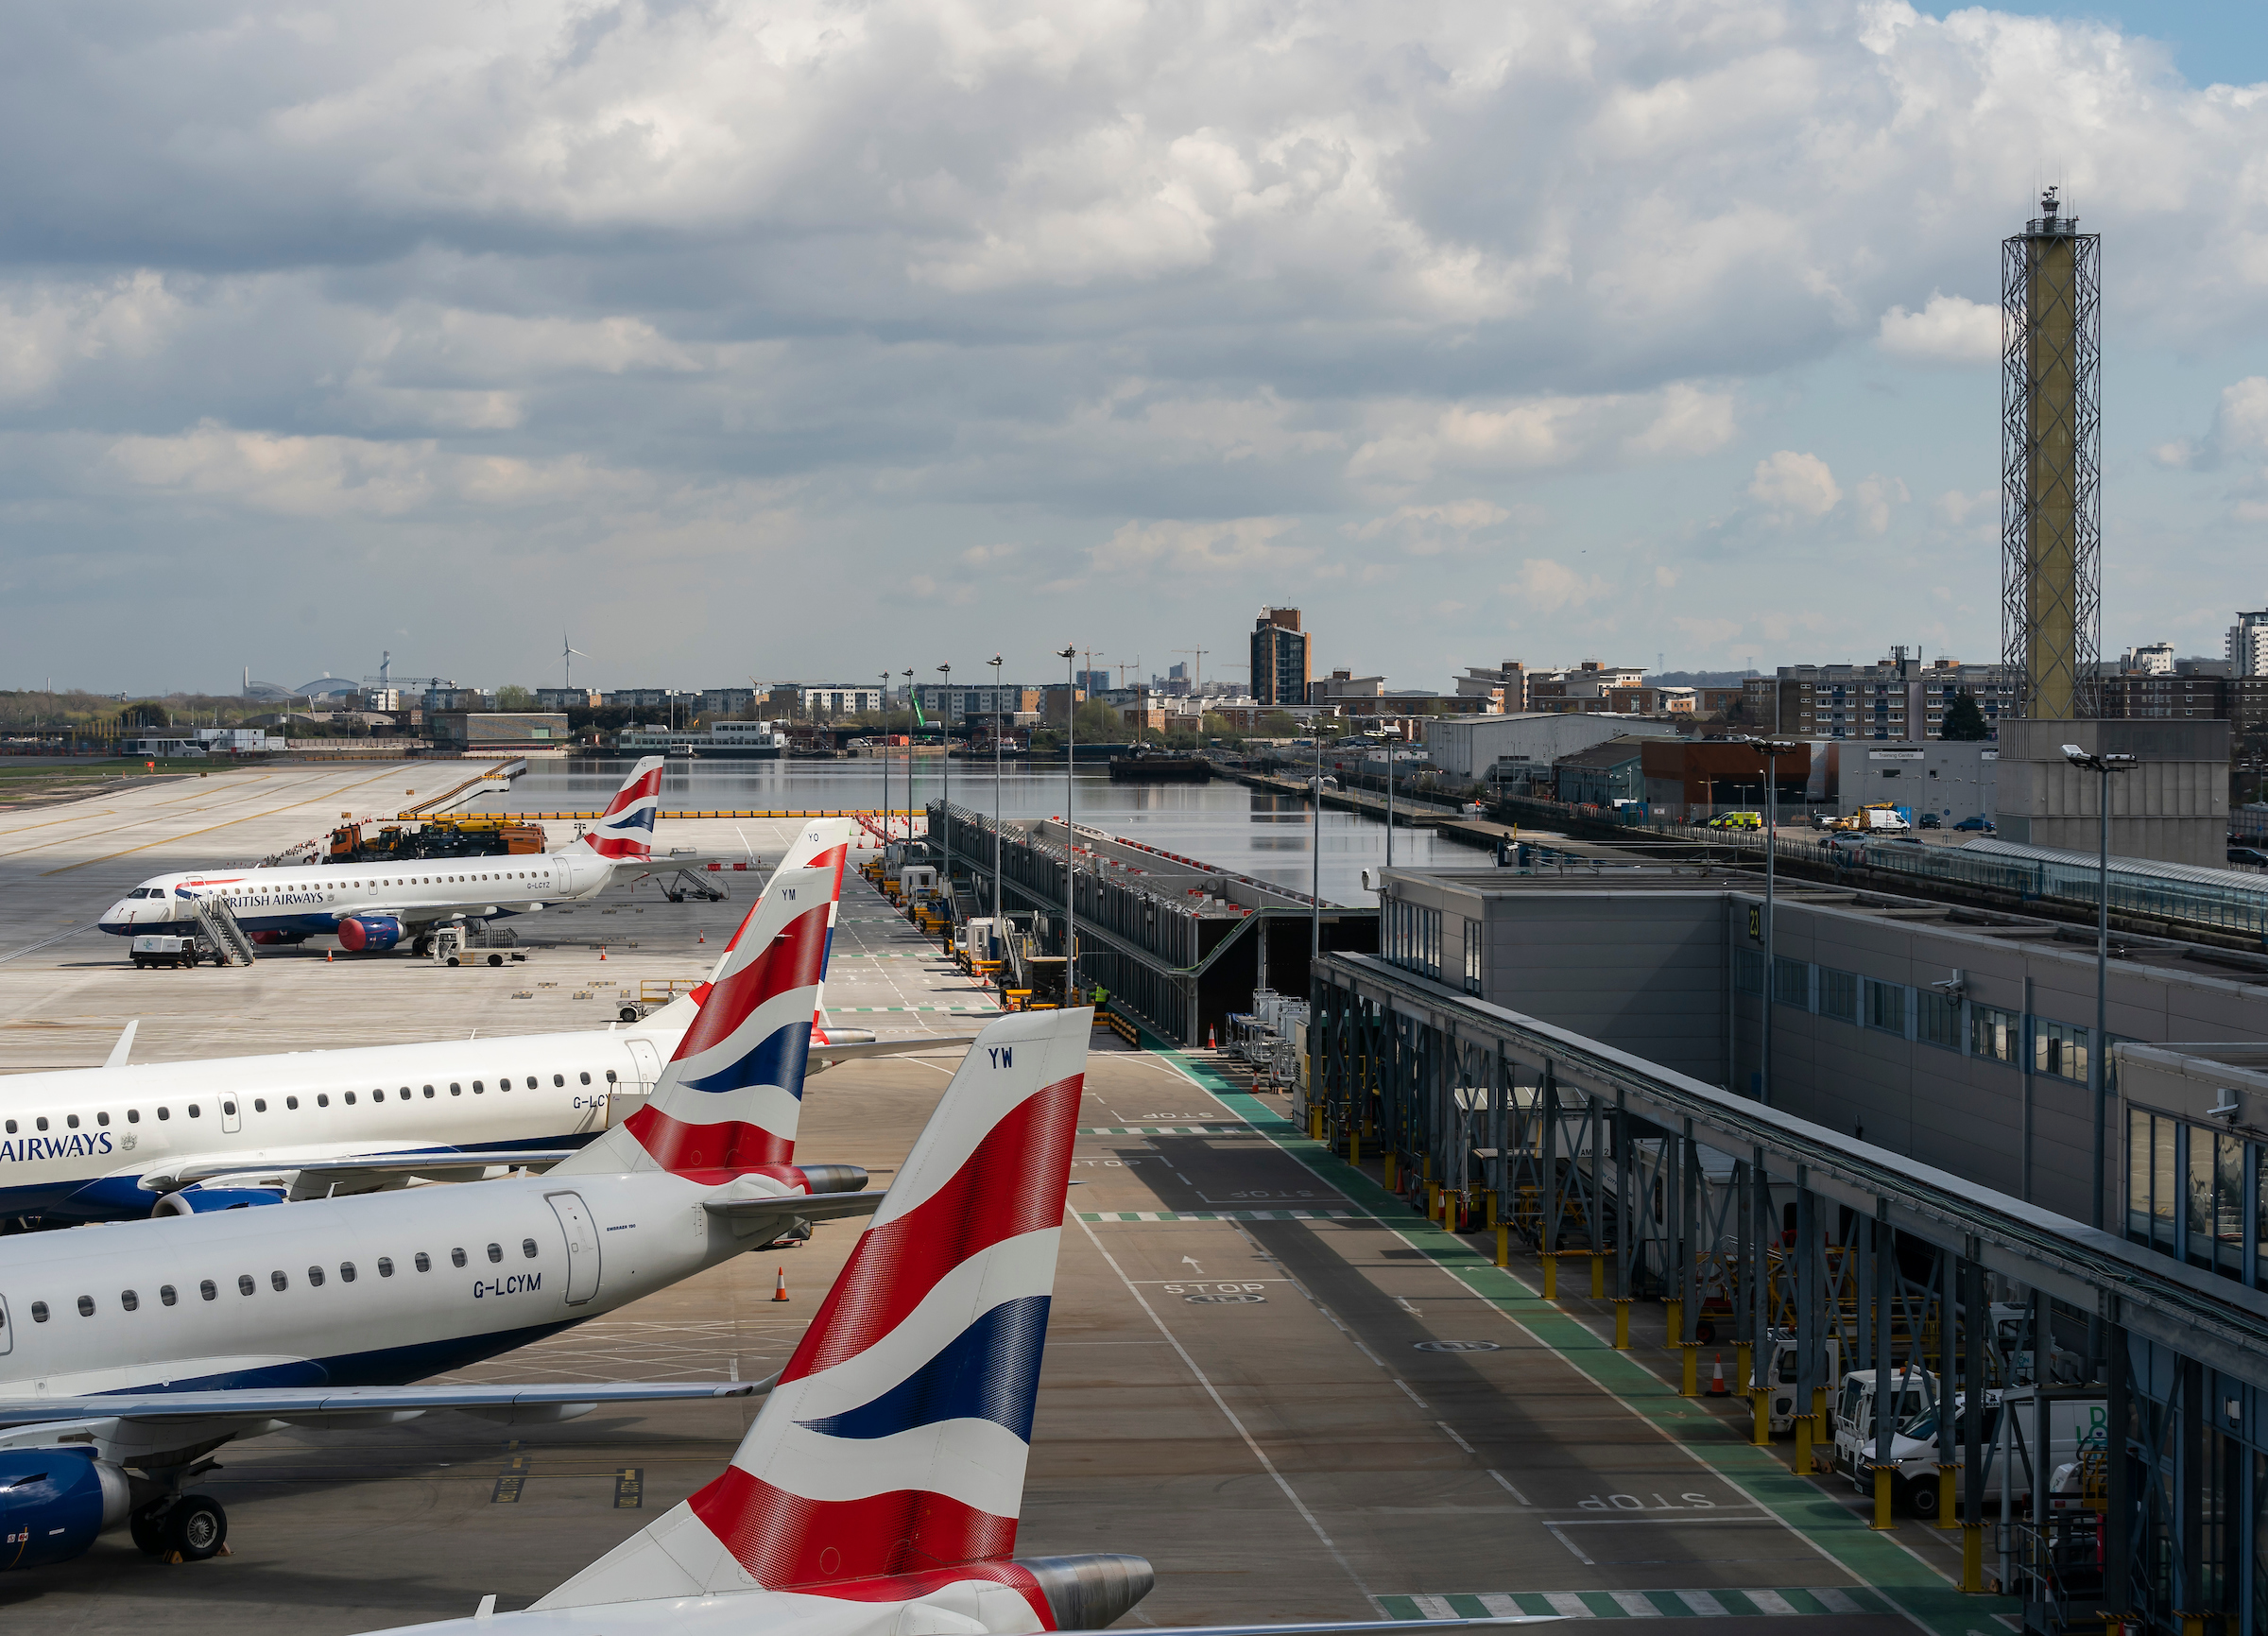 Image supplied by LCY